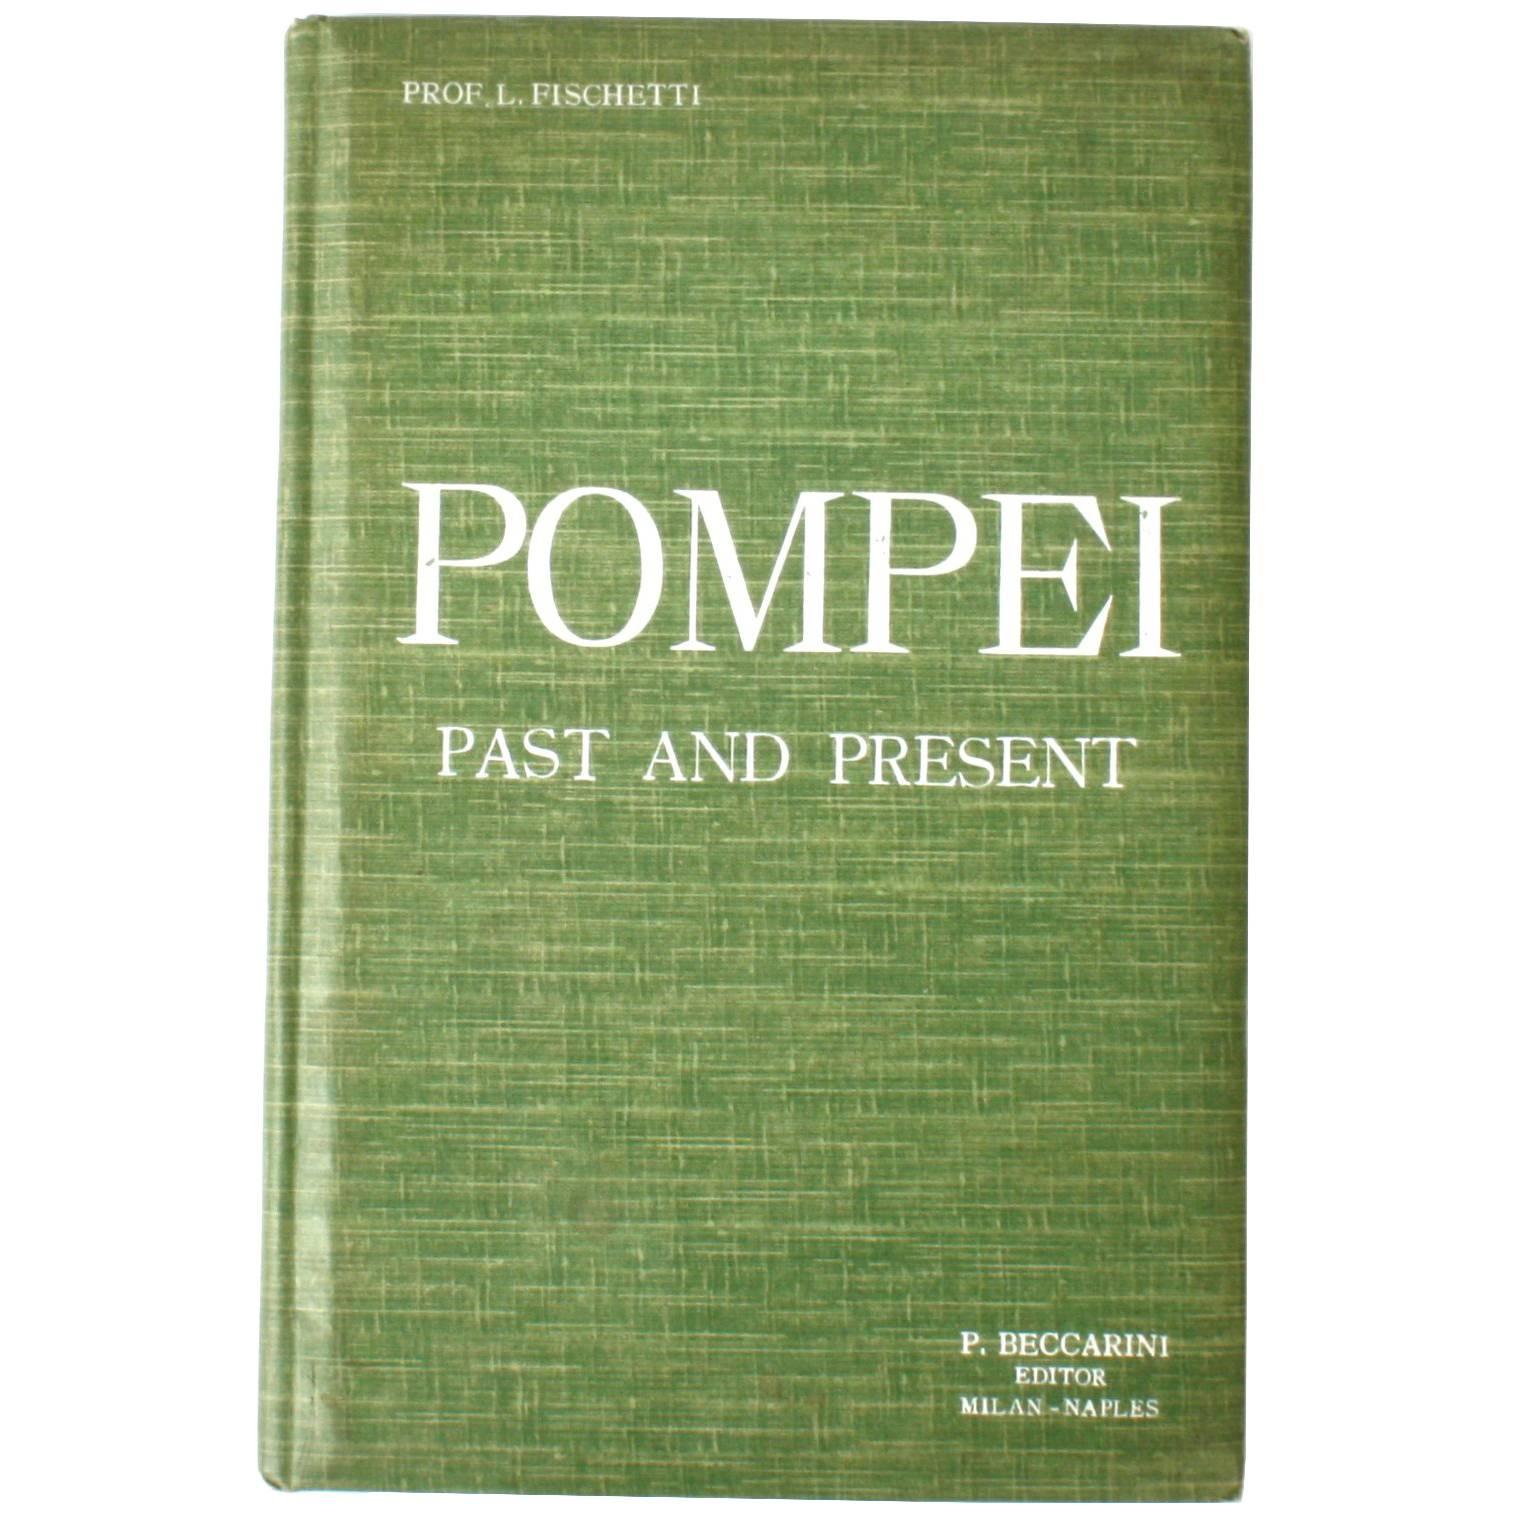 Pompei, Past and Present by P. Beccarini, First Edition